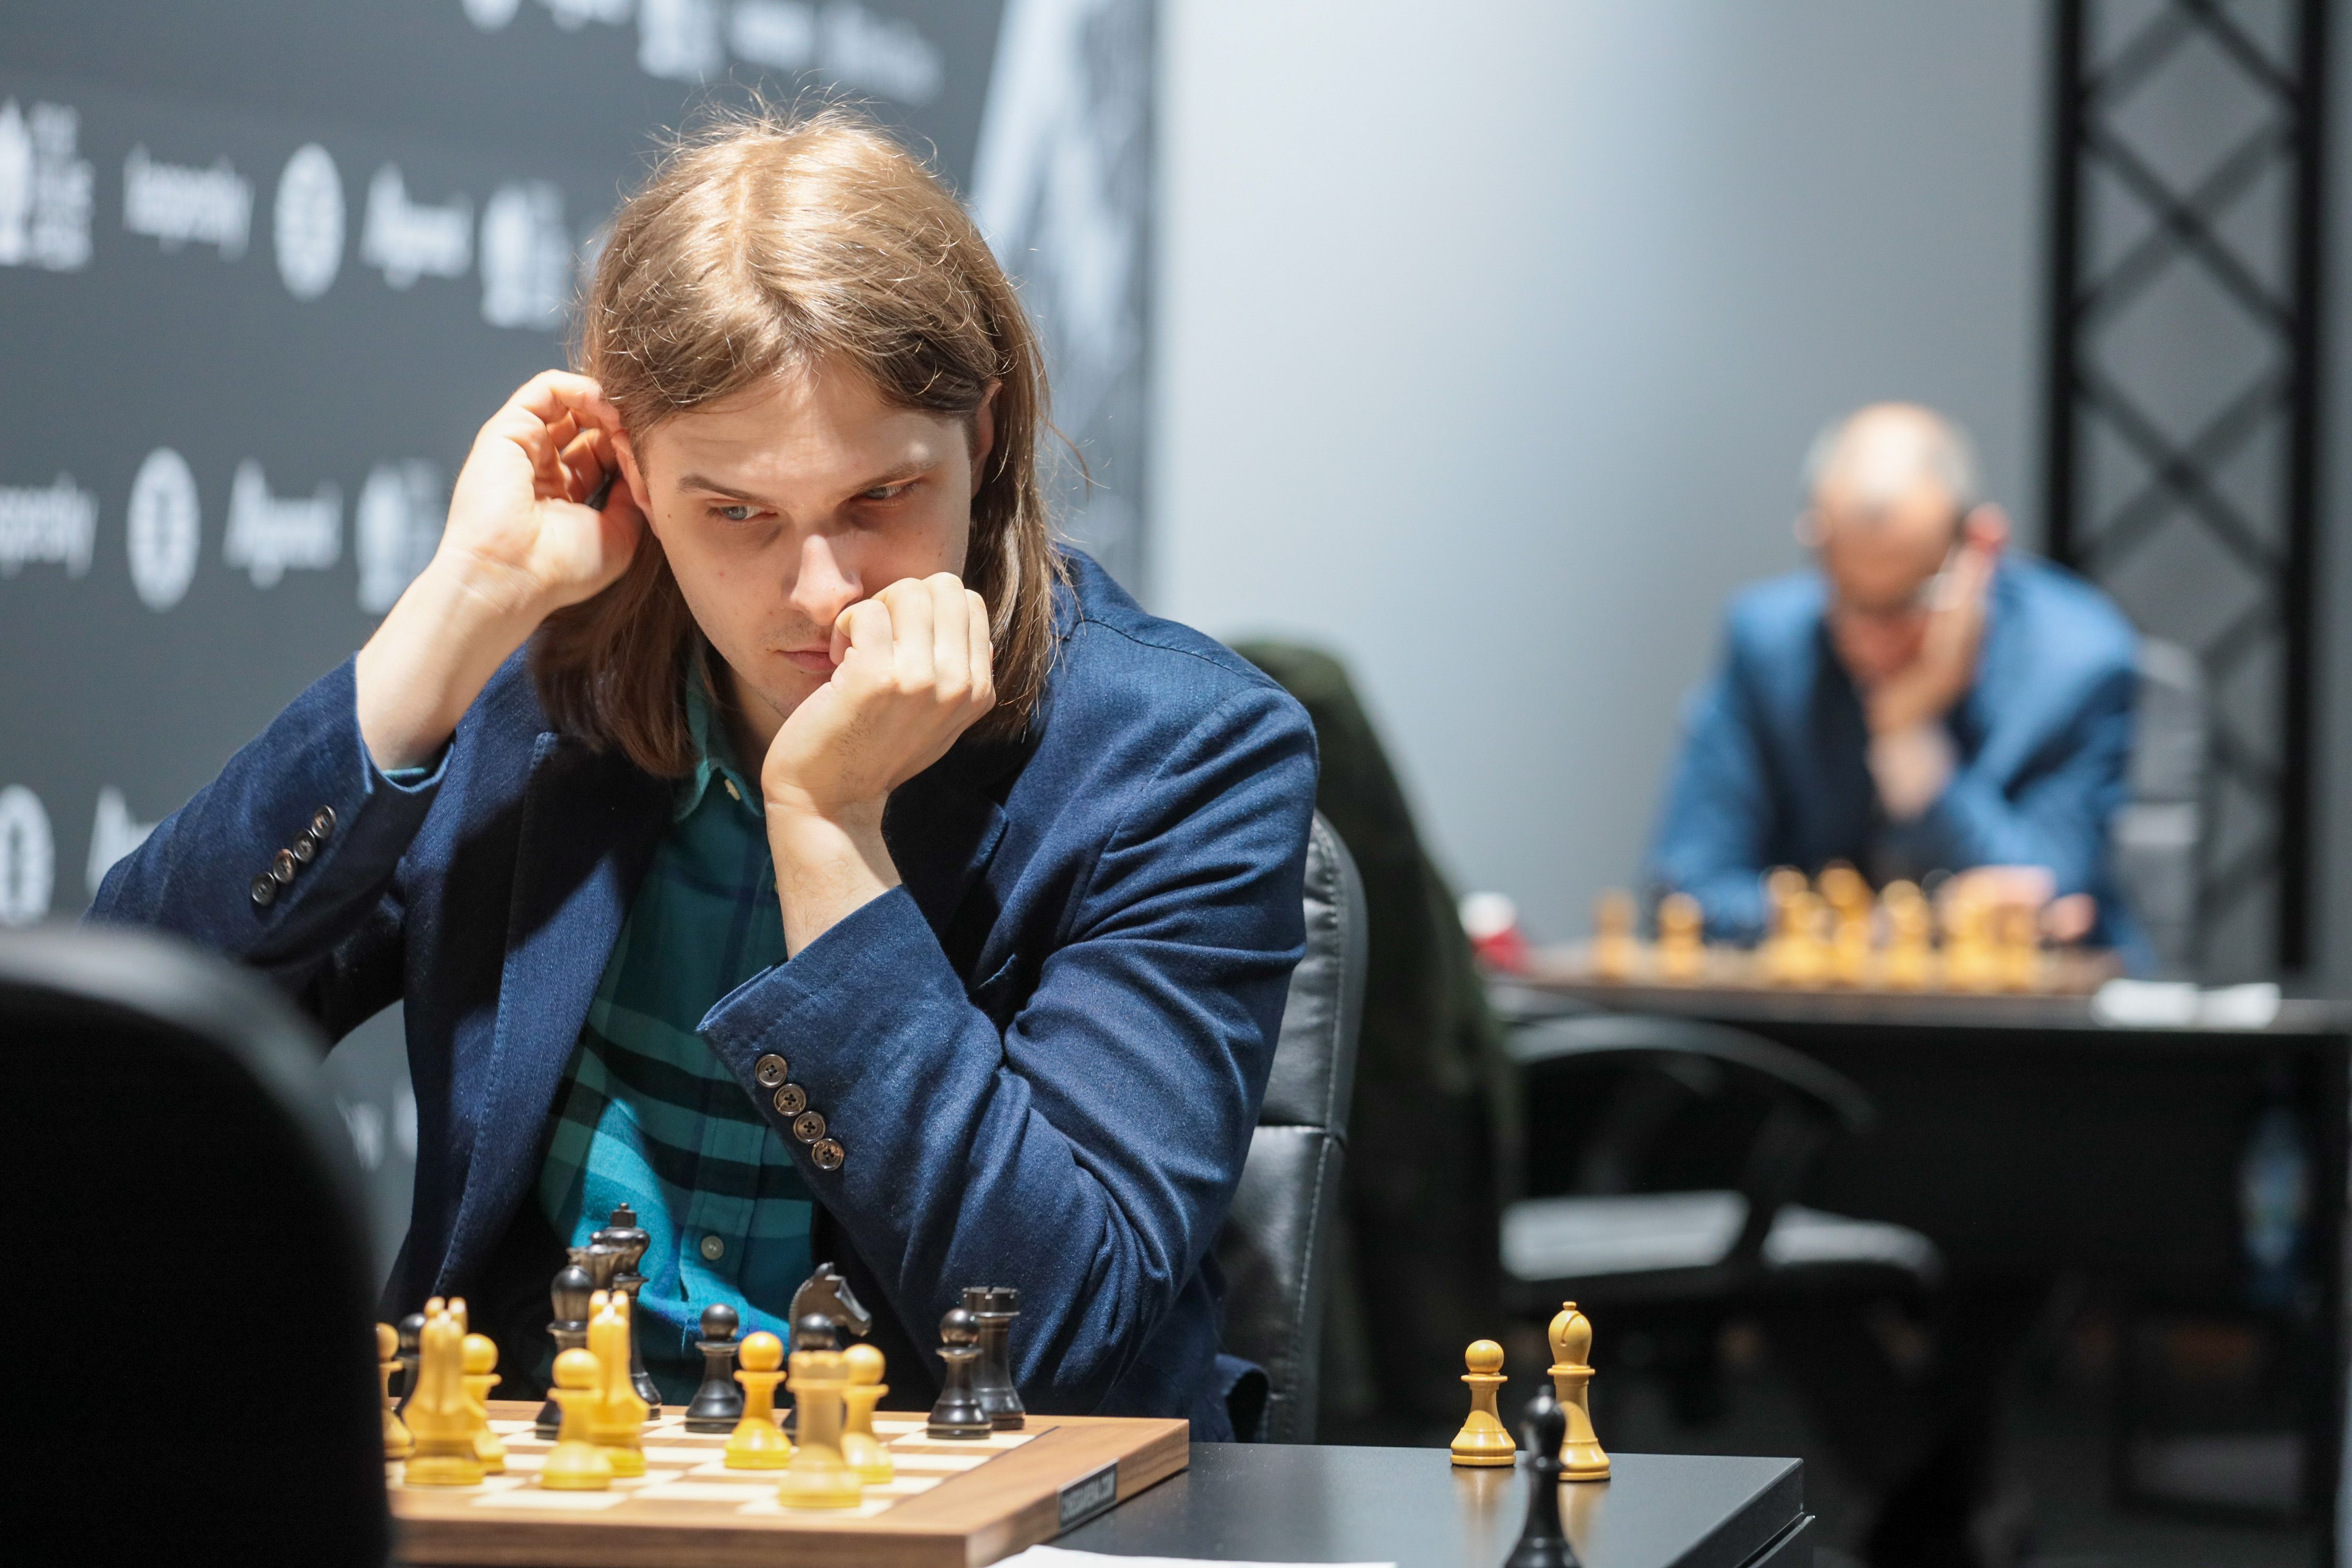 FIDE Grand Prix in turmoil as players forced to pull out